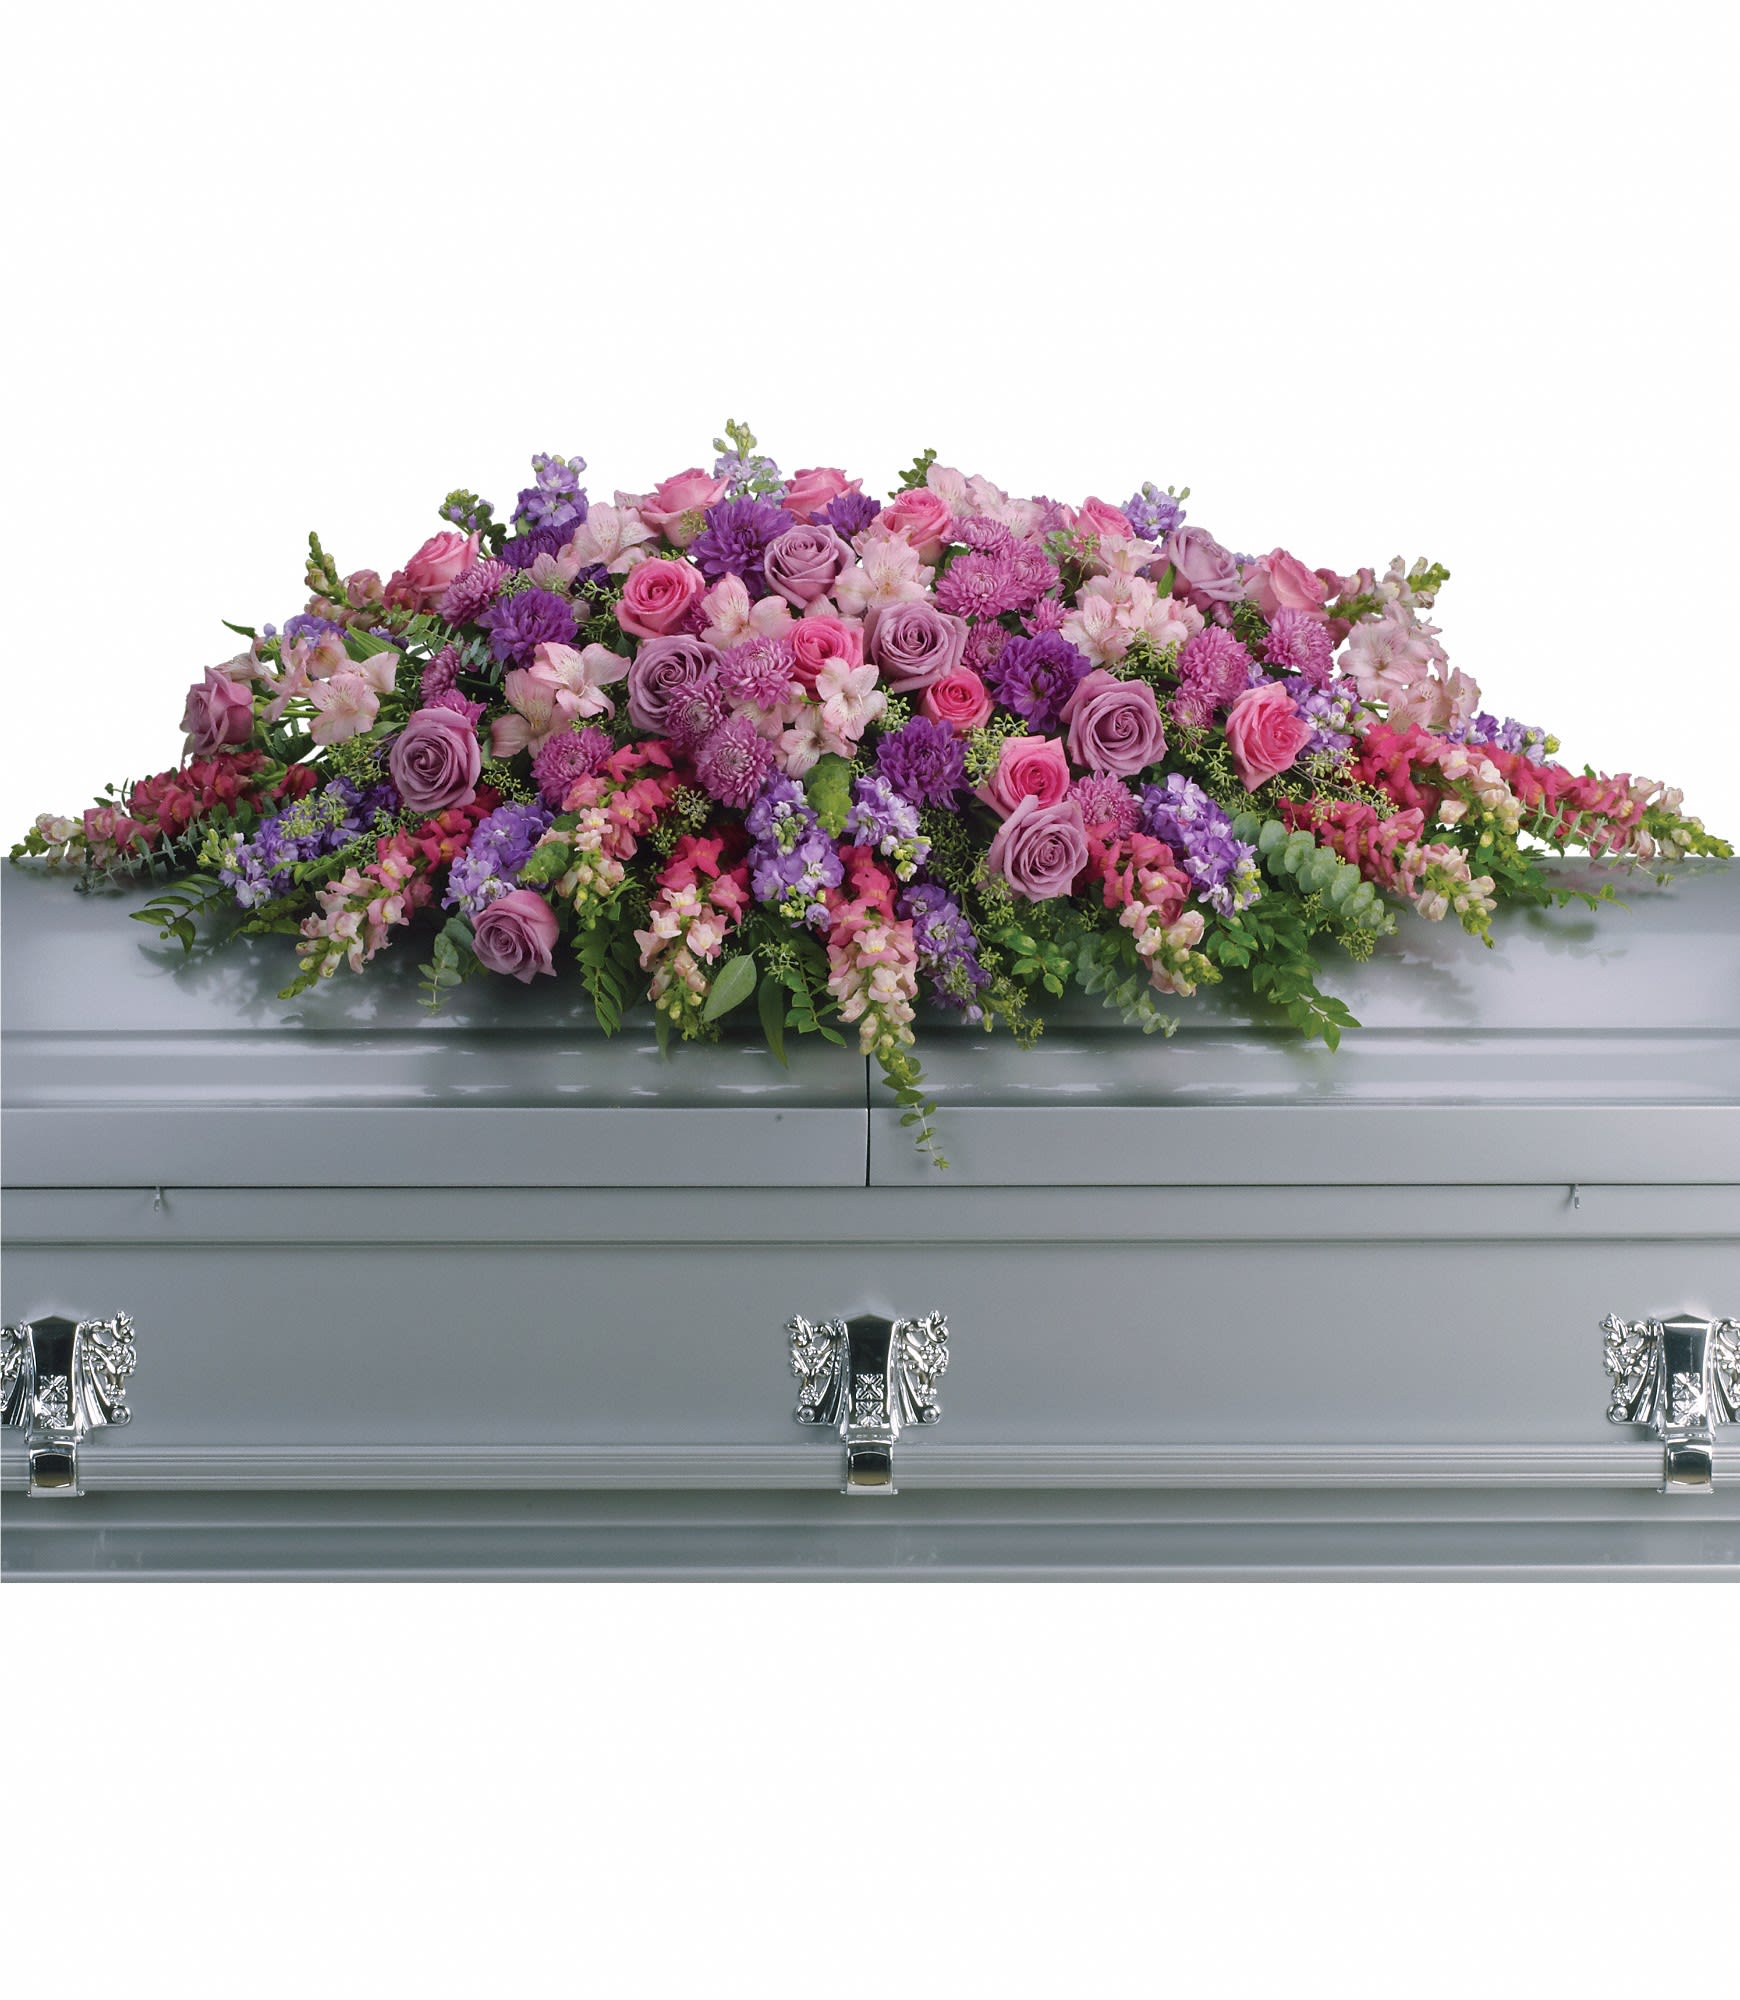 Lavender Tribute Casket Spray - Like a heartfelt embrace, this beautiful casket spray delivers comfort and love in an extraordinary way. A wonderful array of lavender and pink flowers with just the right amount of greenery is a lovely way to pay tribute to someone who will always be with you in heart, mind and spirit. 